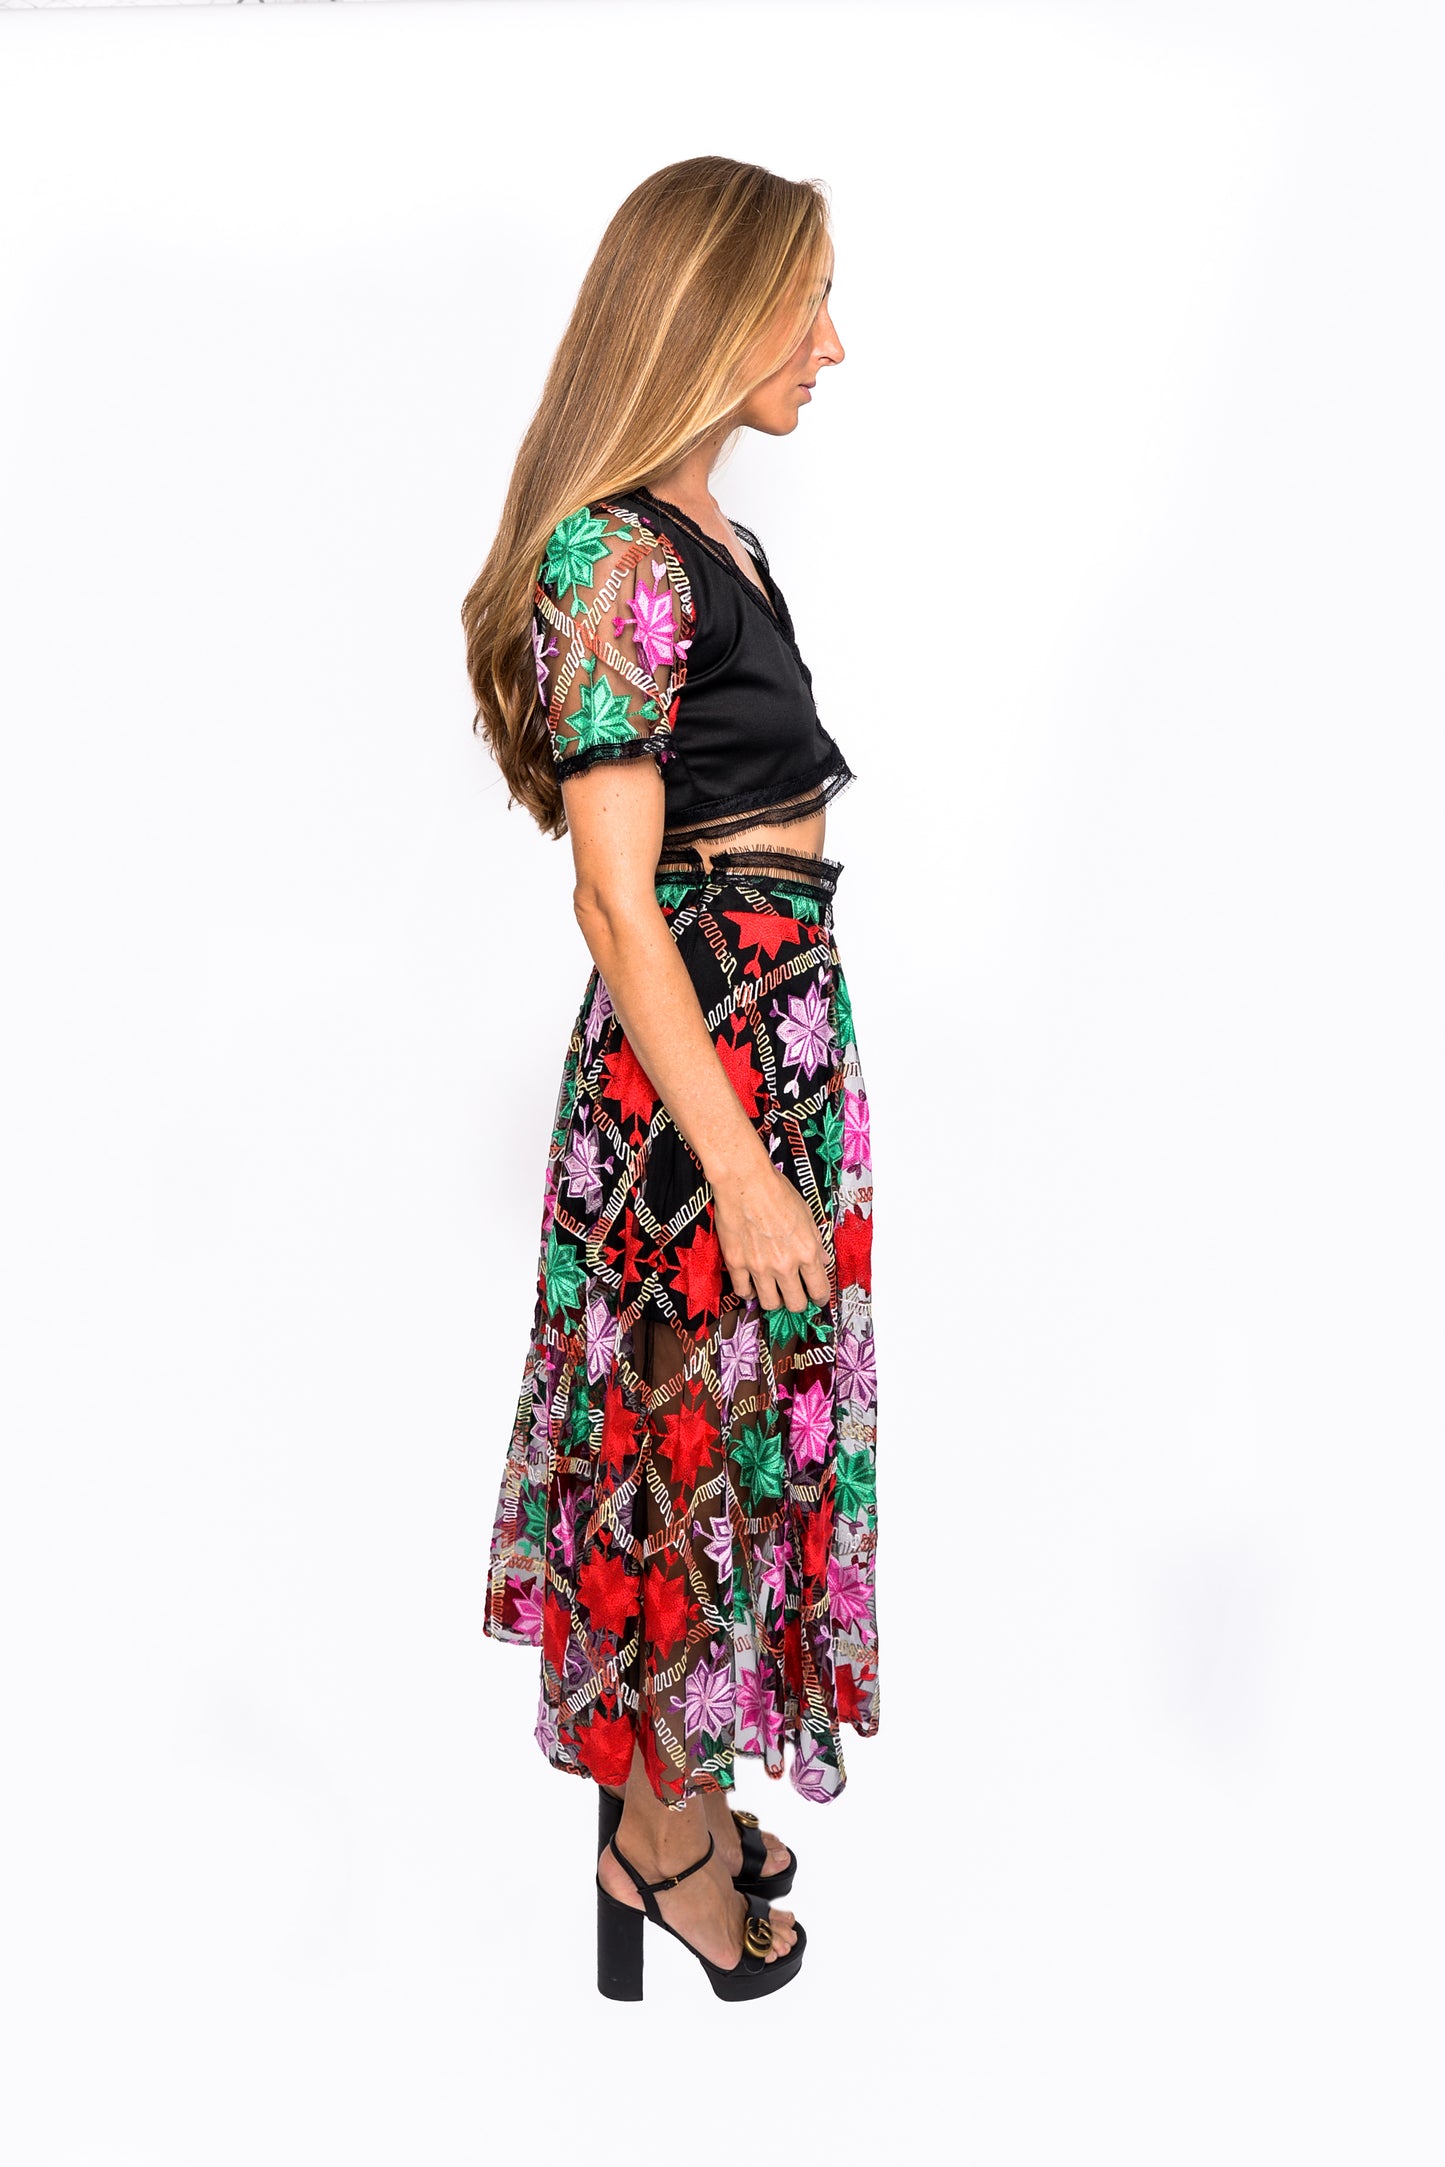 2 PIECES SKIRT AND TOP MATCHING SET BY PATRICIA TRUJILLO